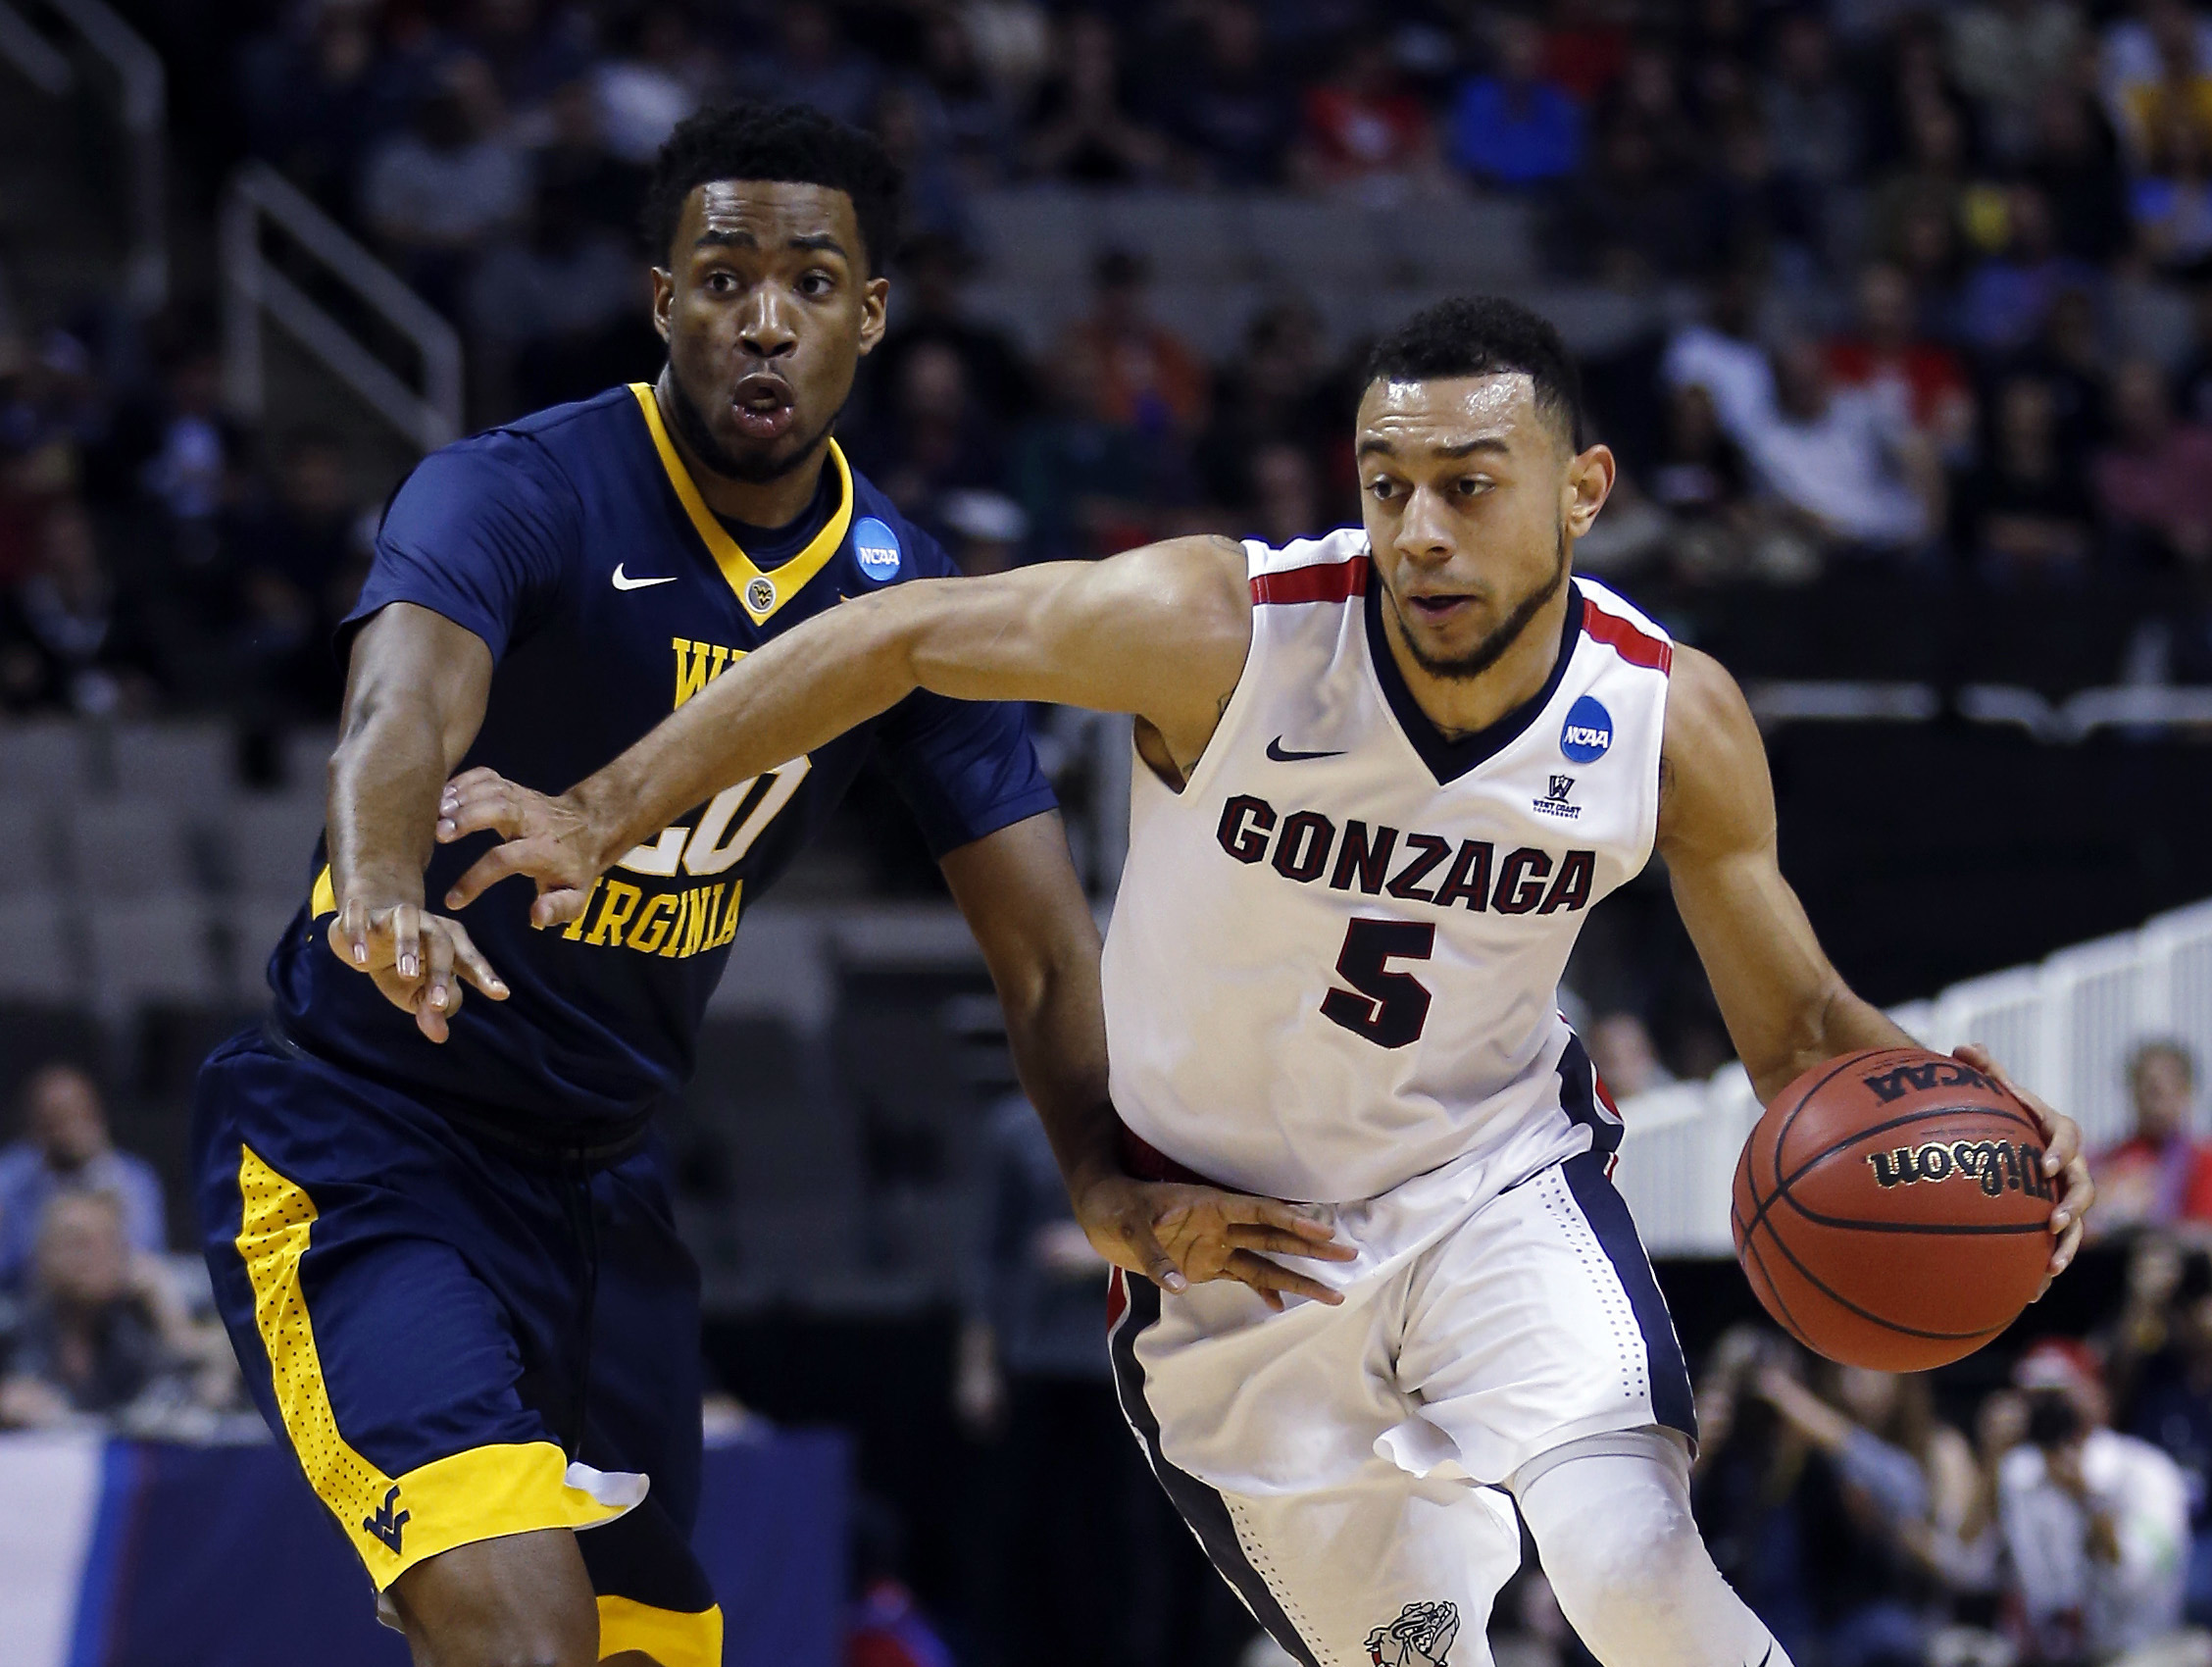 Gonzaga guard Nigel Williams-Goss (5) is defended by West Virginia forward Brandon Watkins during the first half of an NCAA Tournament college basketball regional semifinal game Thursday, March 23, 2017, in San Jose, Calif.